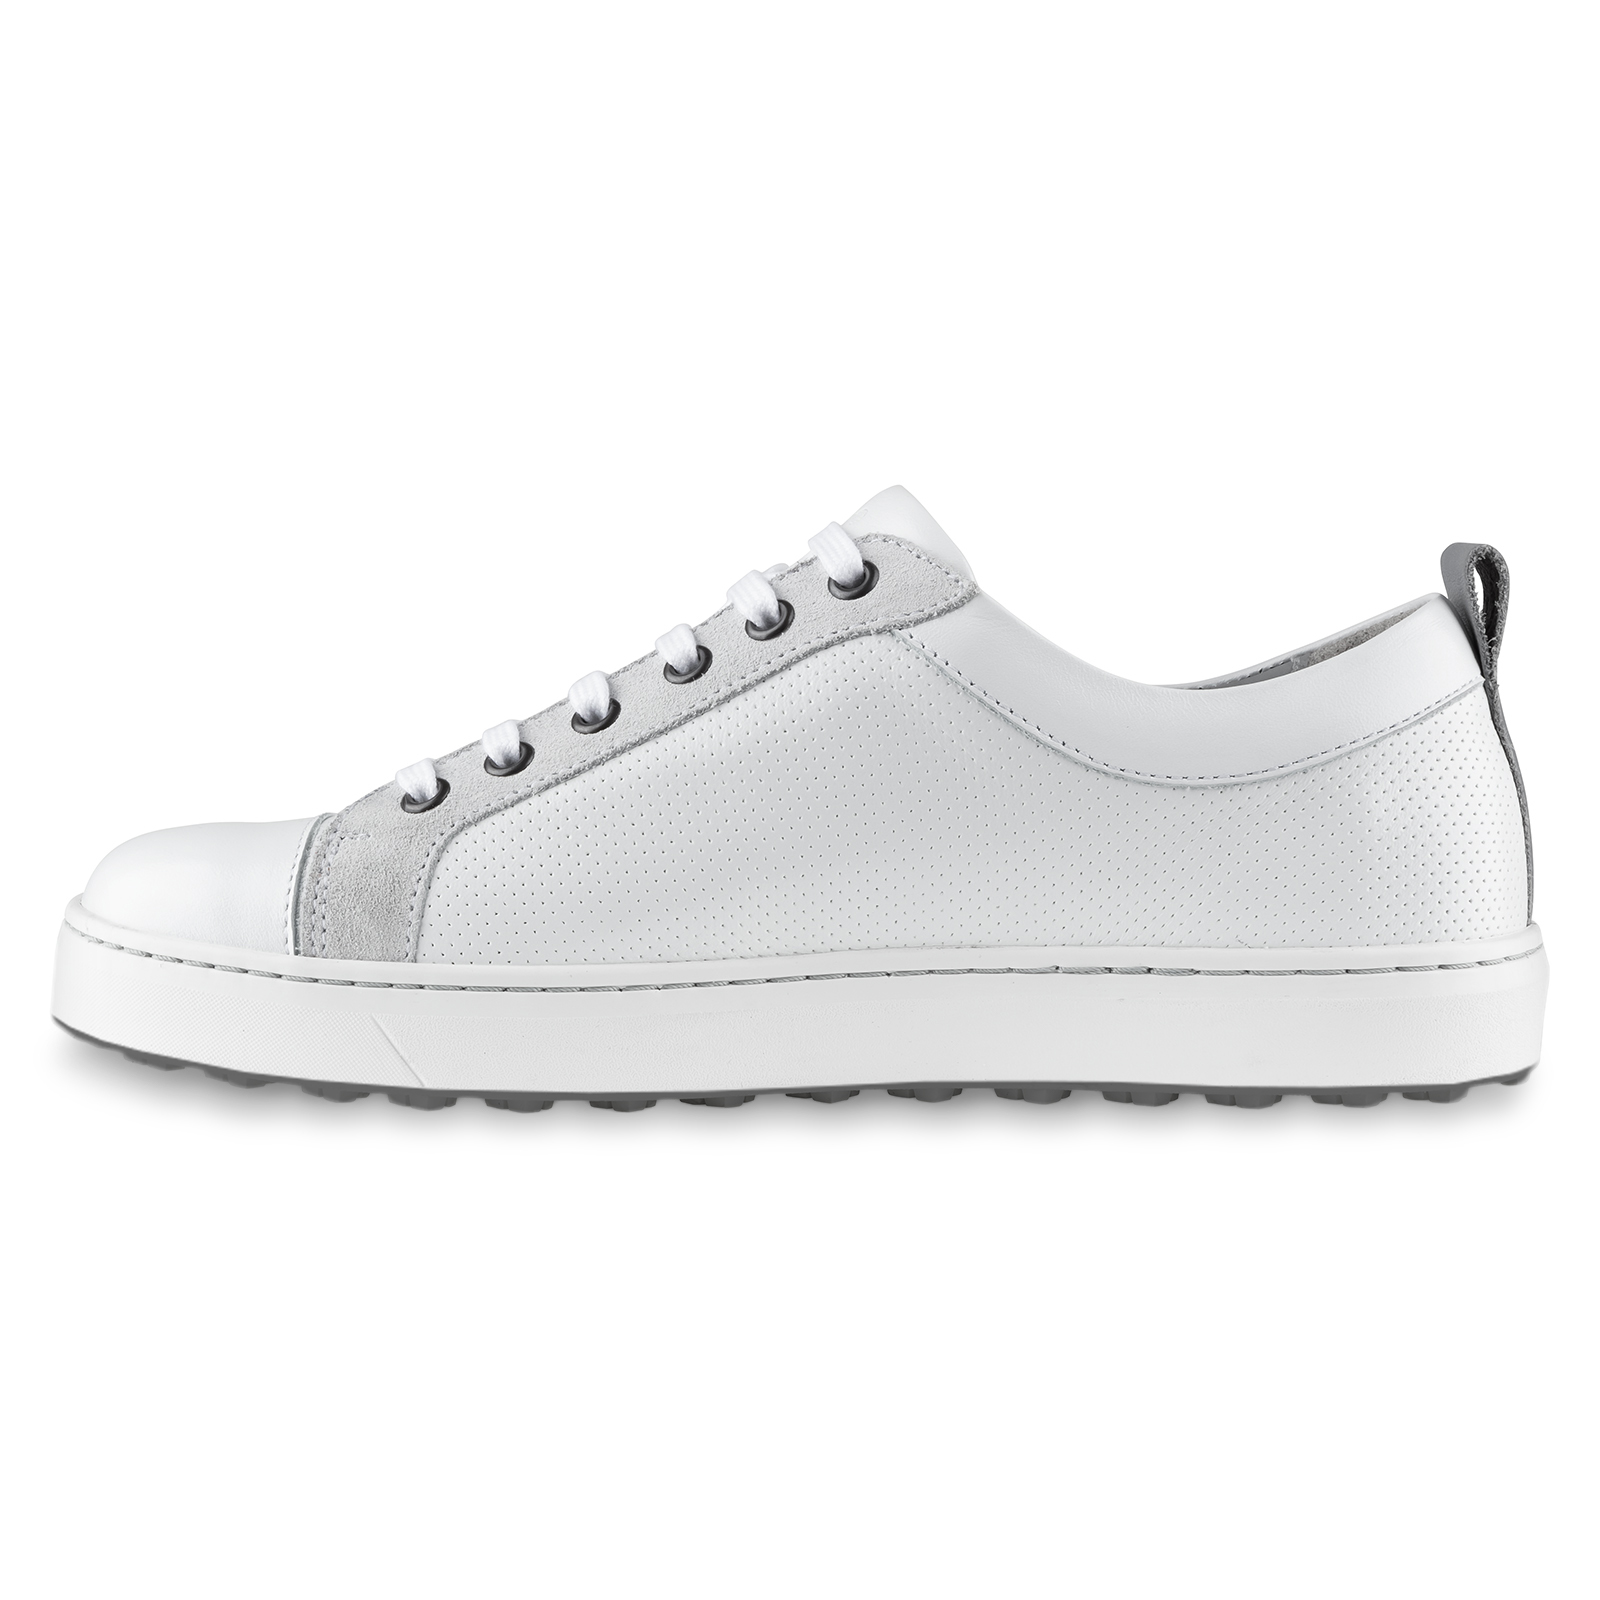 Sporty ladies' shoes